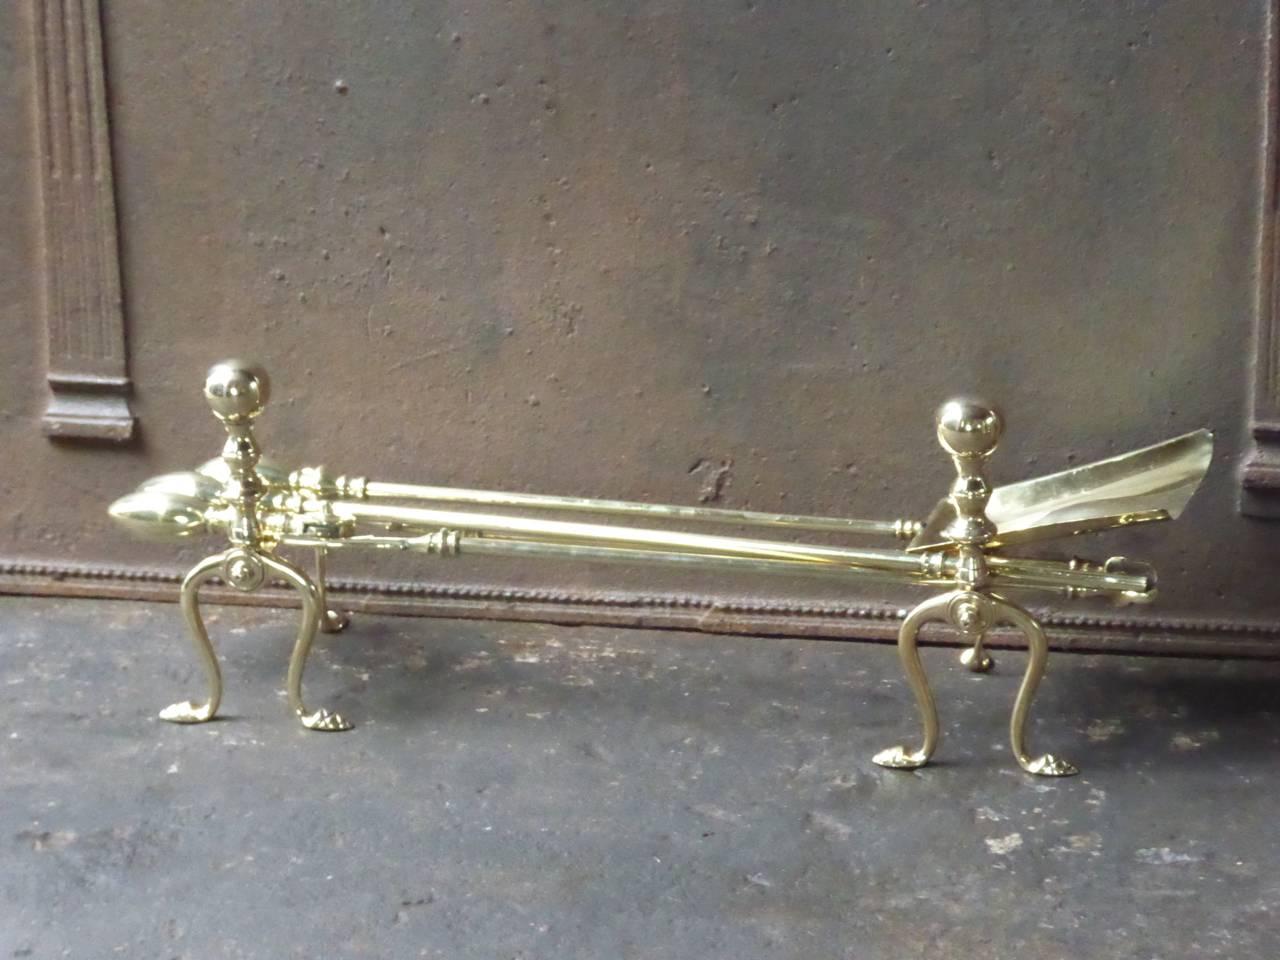 English fireplace tool set or fire irons made of polished brass.